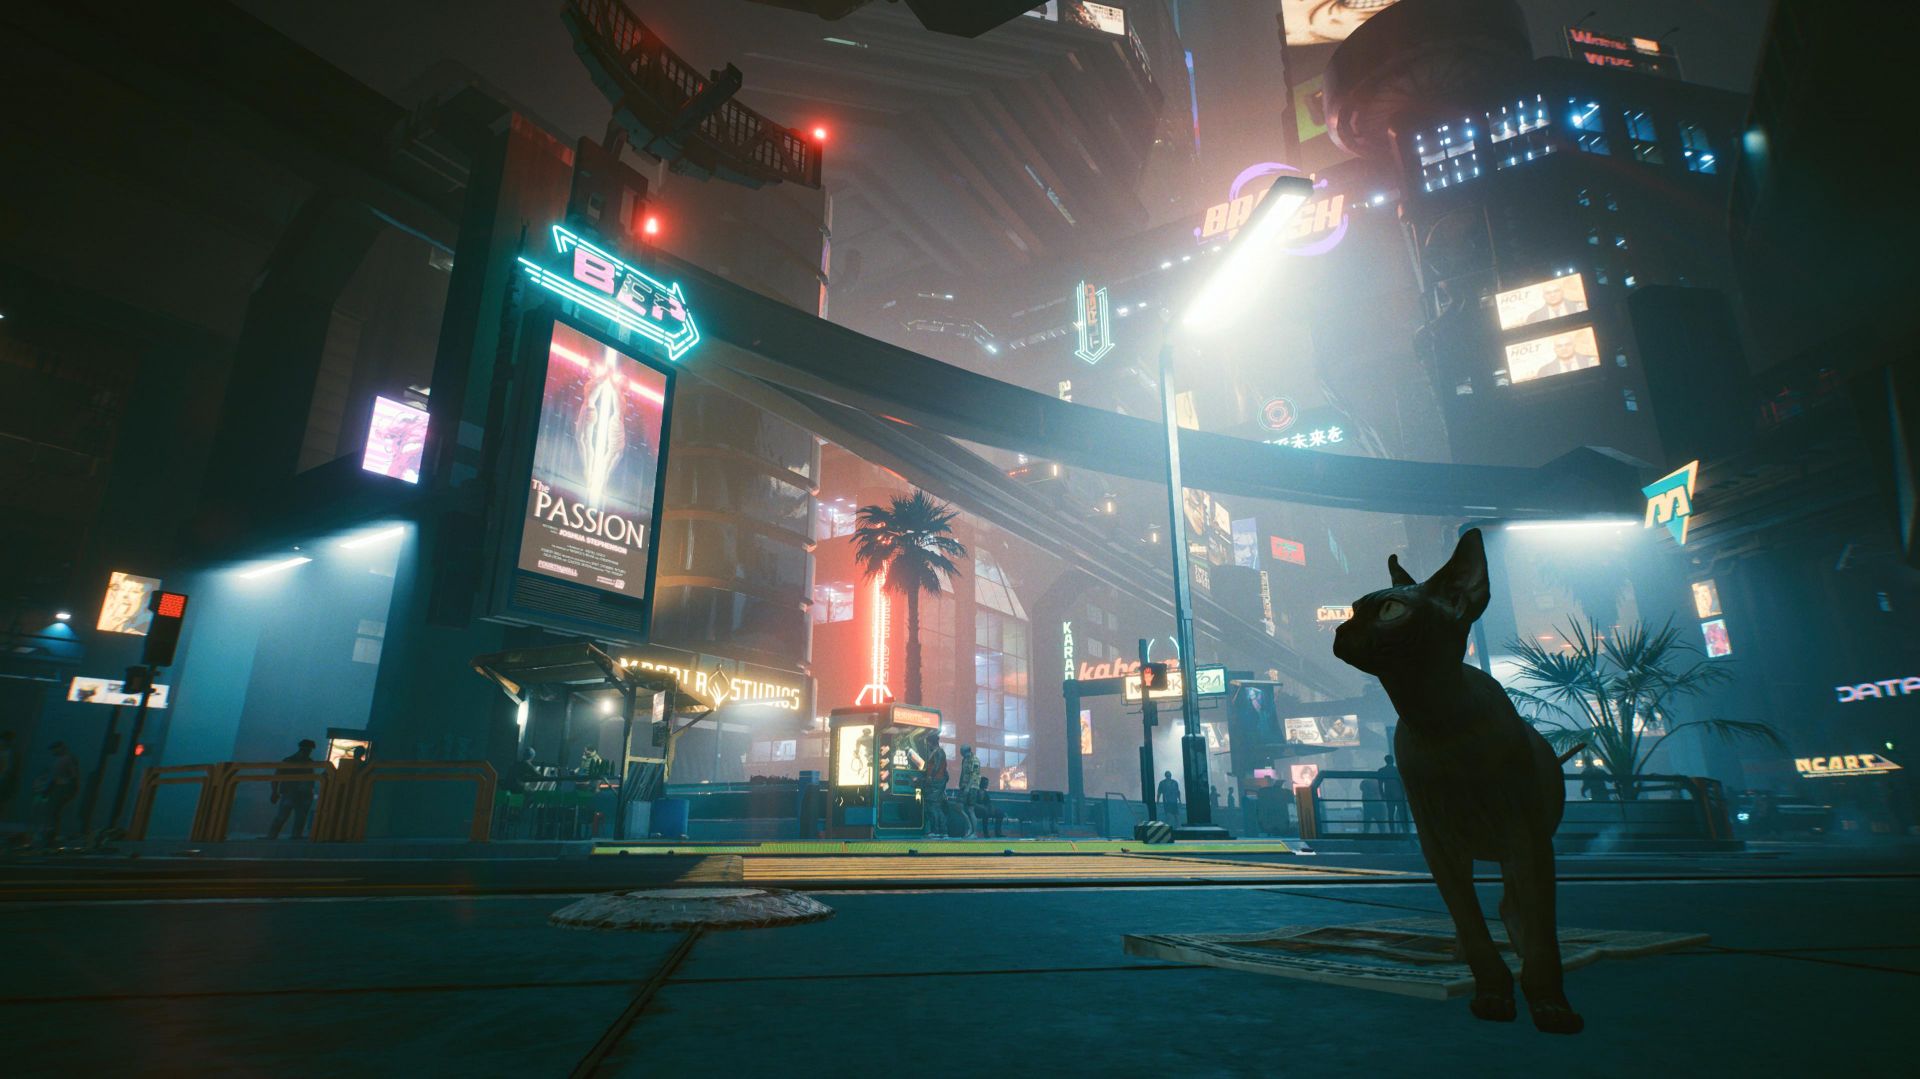 Cyberpunk 2077 — from the creators of The Witcher 3: Wild Hunt